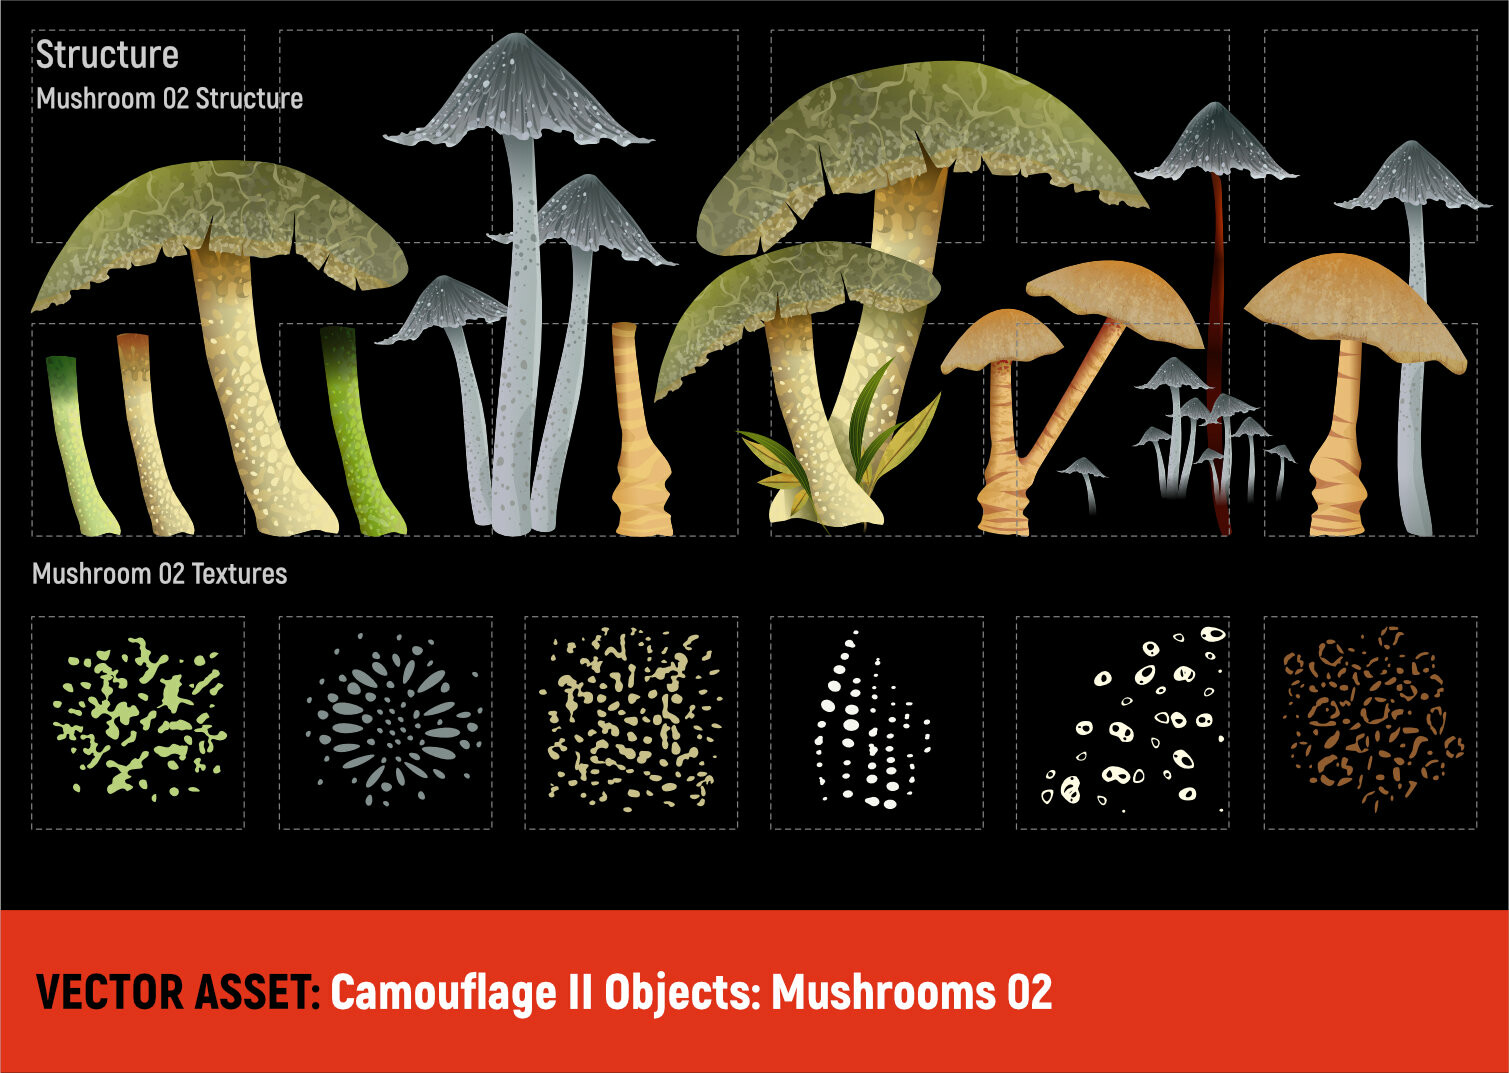 Vector Assets: Camouflage 2
Mushrooms 02